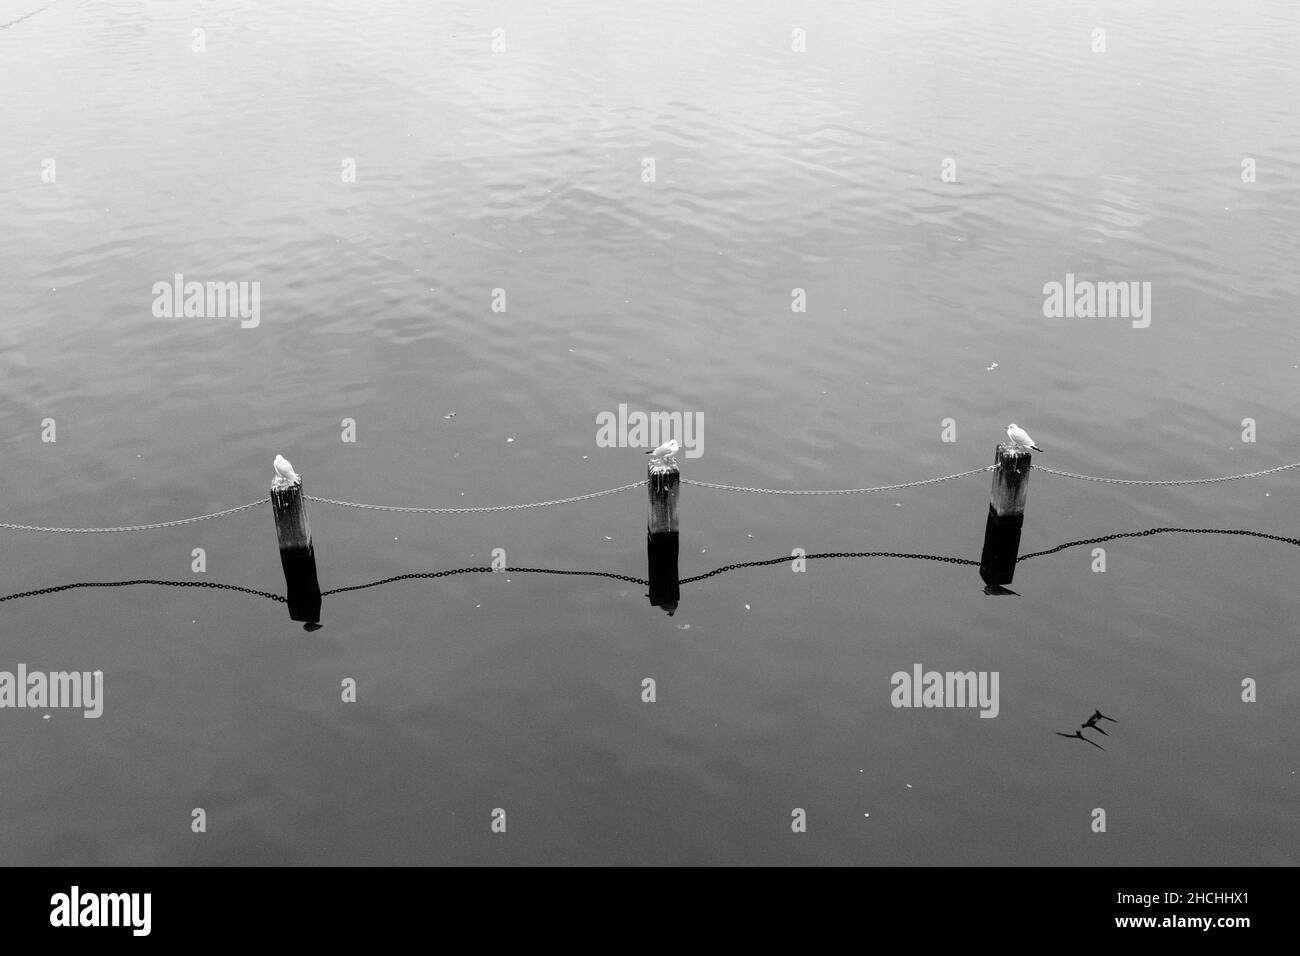 abstract view of 3 birds perched on 3 posts linked by a chain on a lake. in black and white with no distractions just water and reflections Stock Photo